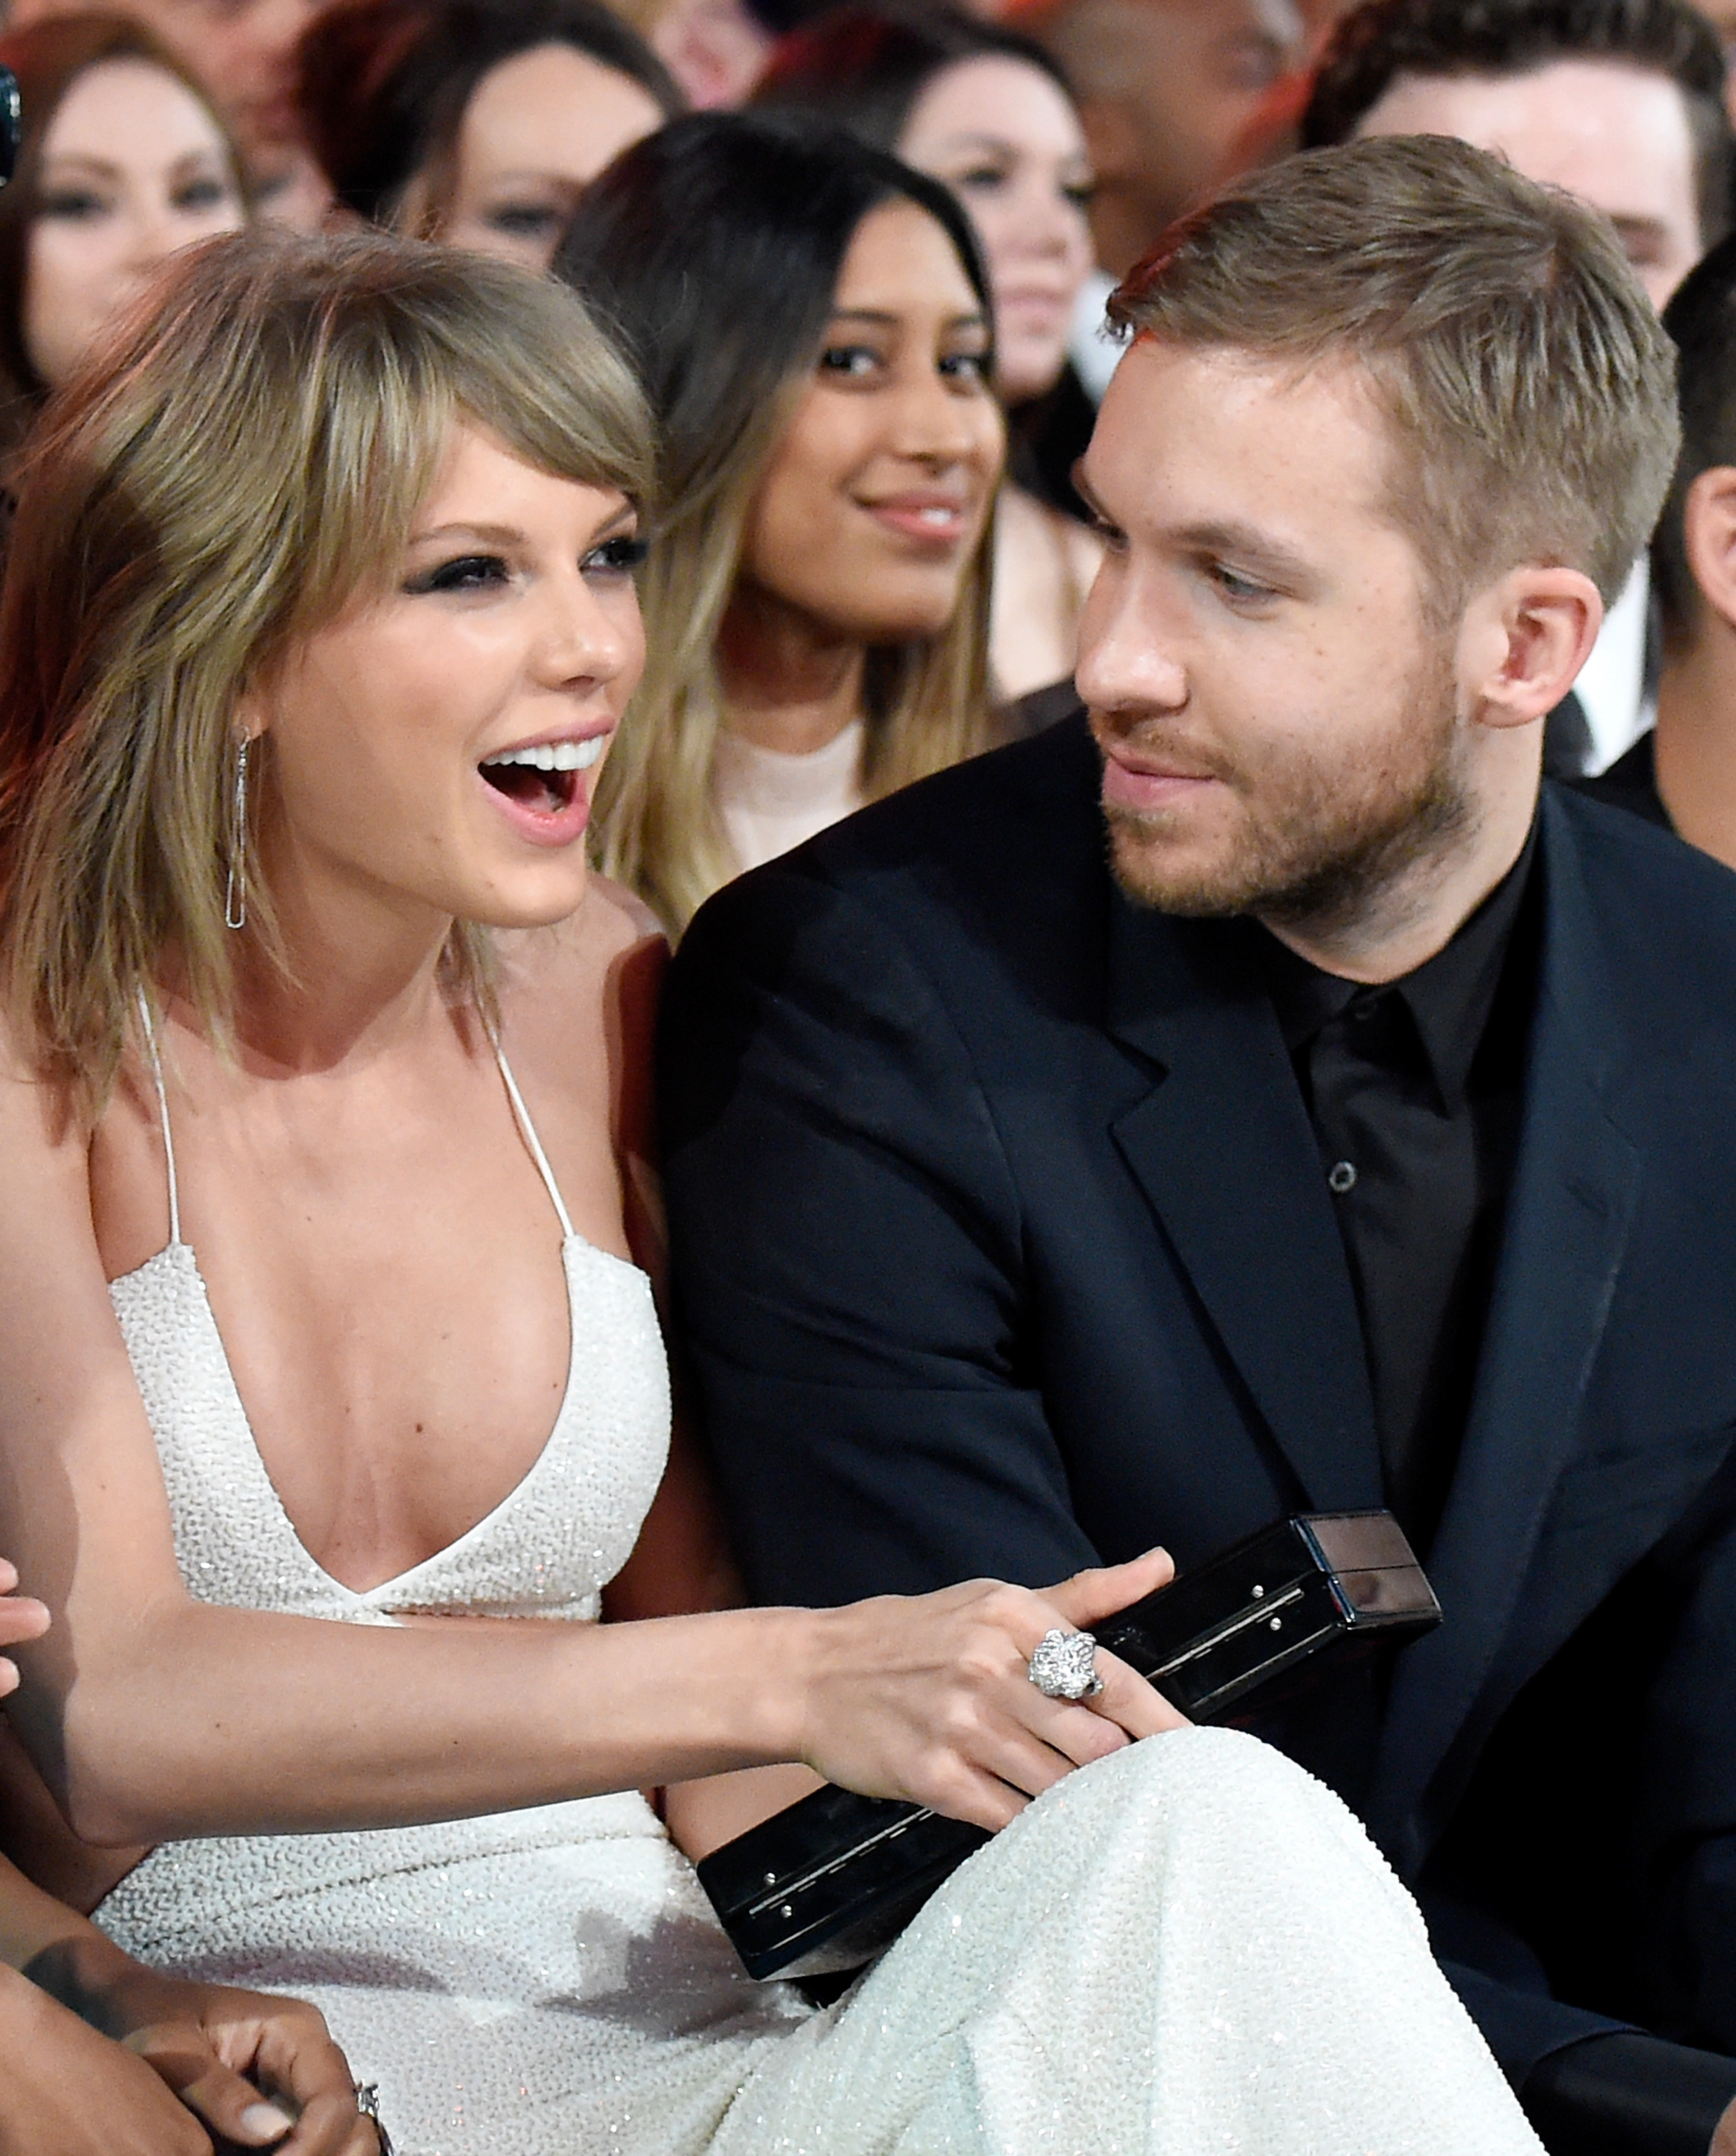 LAS VEGAS, NV - MAY 17: Recording artists Taylor Swift (L) and Calvin Harris attend the 2015 Billboard Music Awards at MGM Grand Garden Arena on May 17, 2015 in Las Vegas, Nevada. (Photo by Kevin Mazur/BMA2015/WireImage)